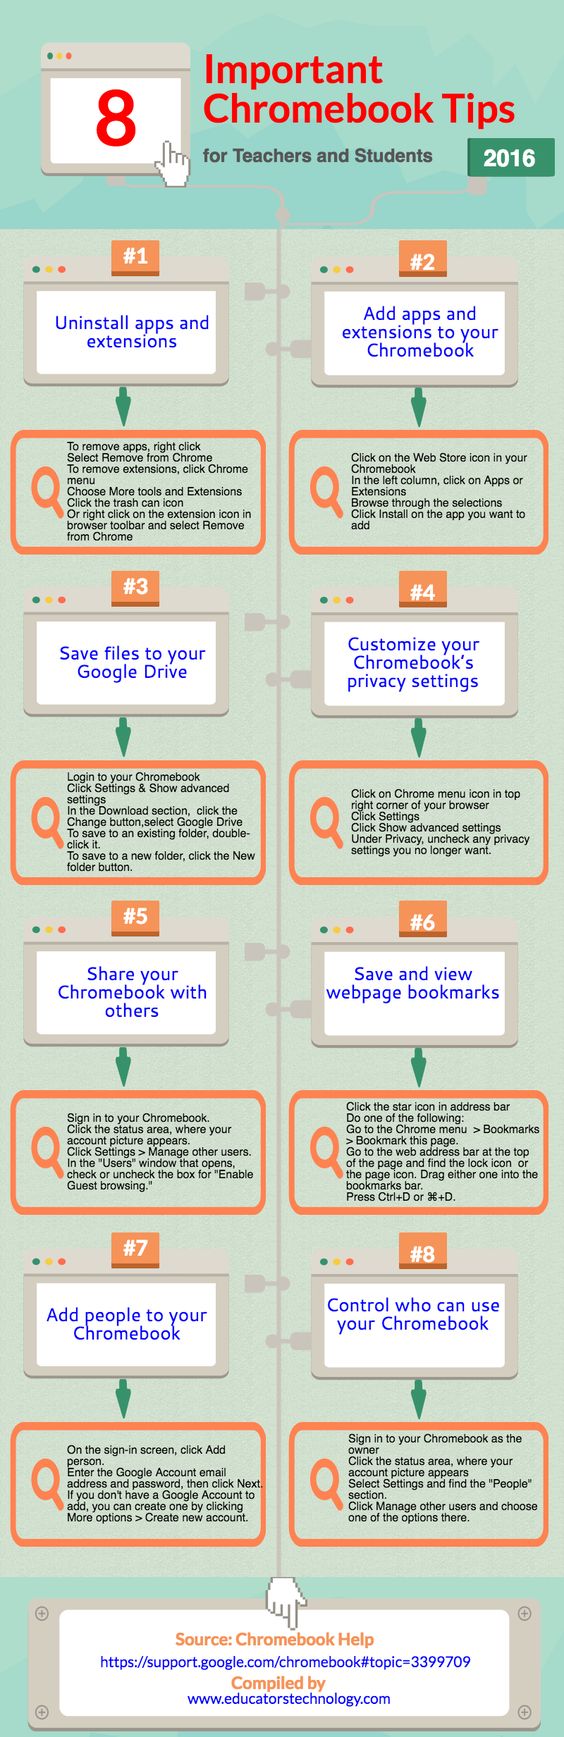 8 Important Chromebook Tips for Teachers and Students (Poster)